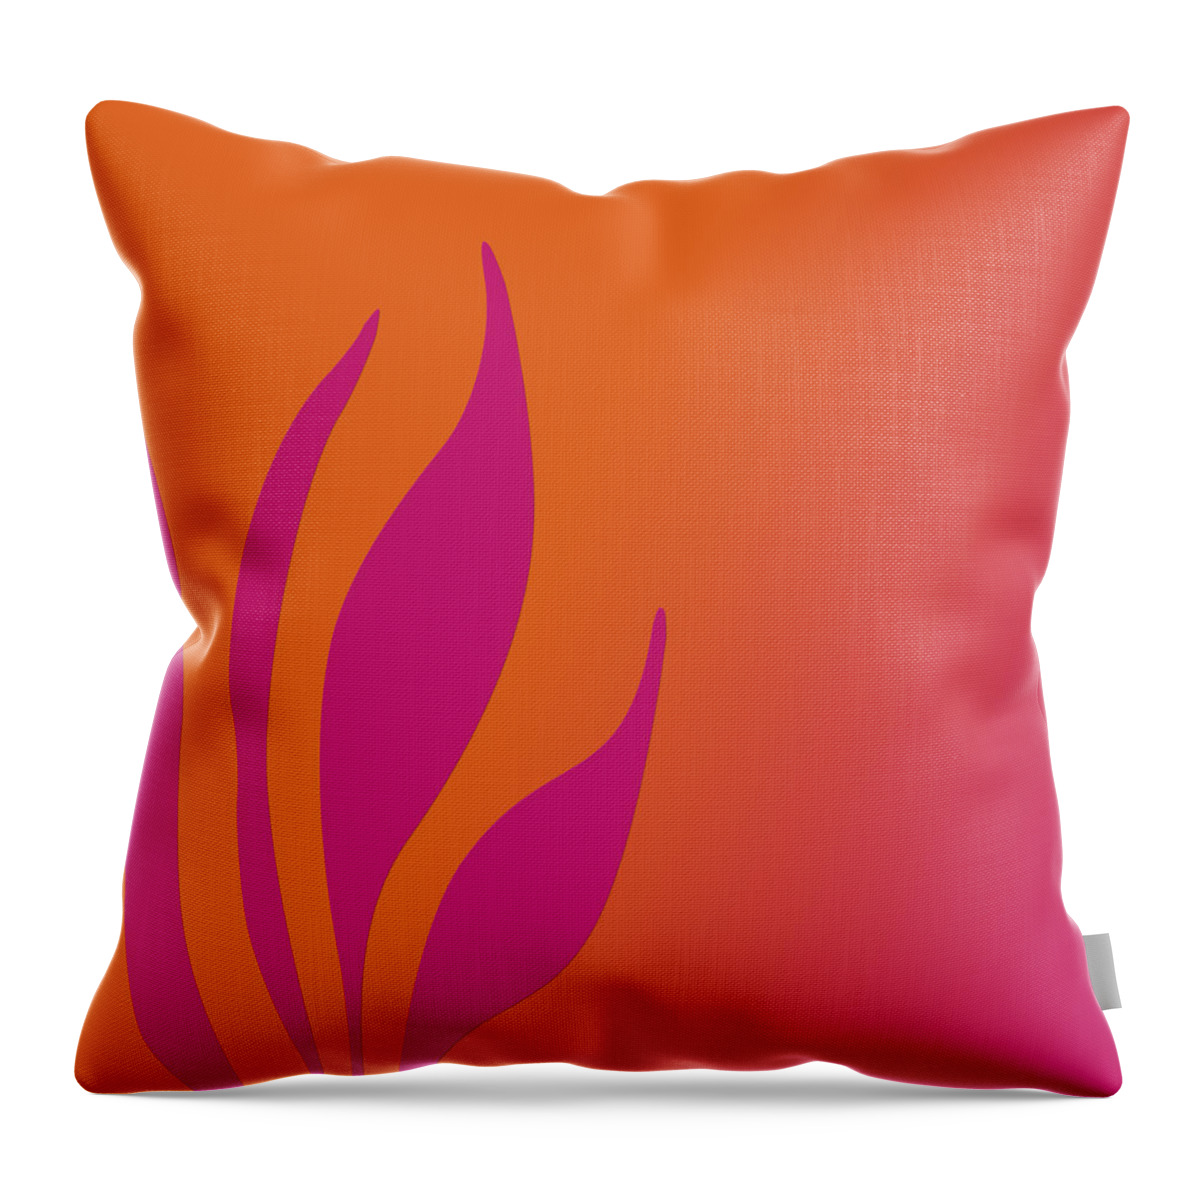 Colorful Throw Pillow featuring the painting Dune Sunset No3 by Bonnie Bruno